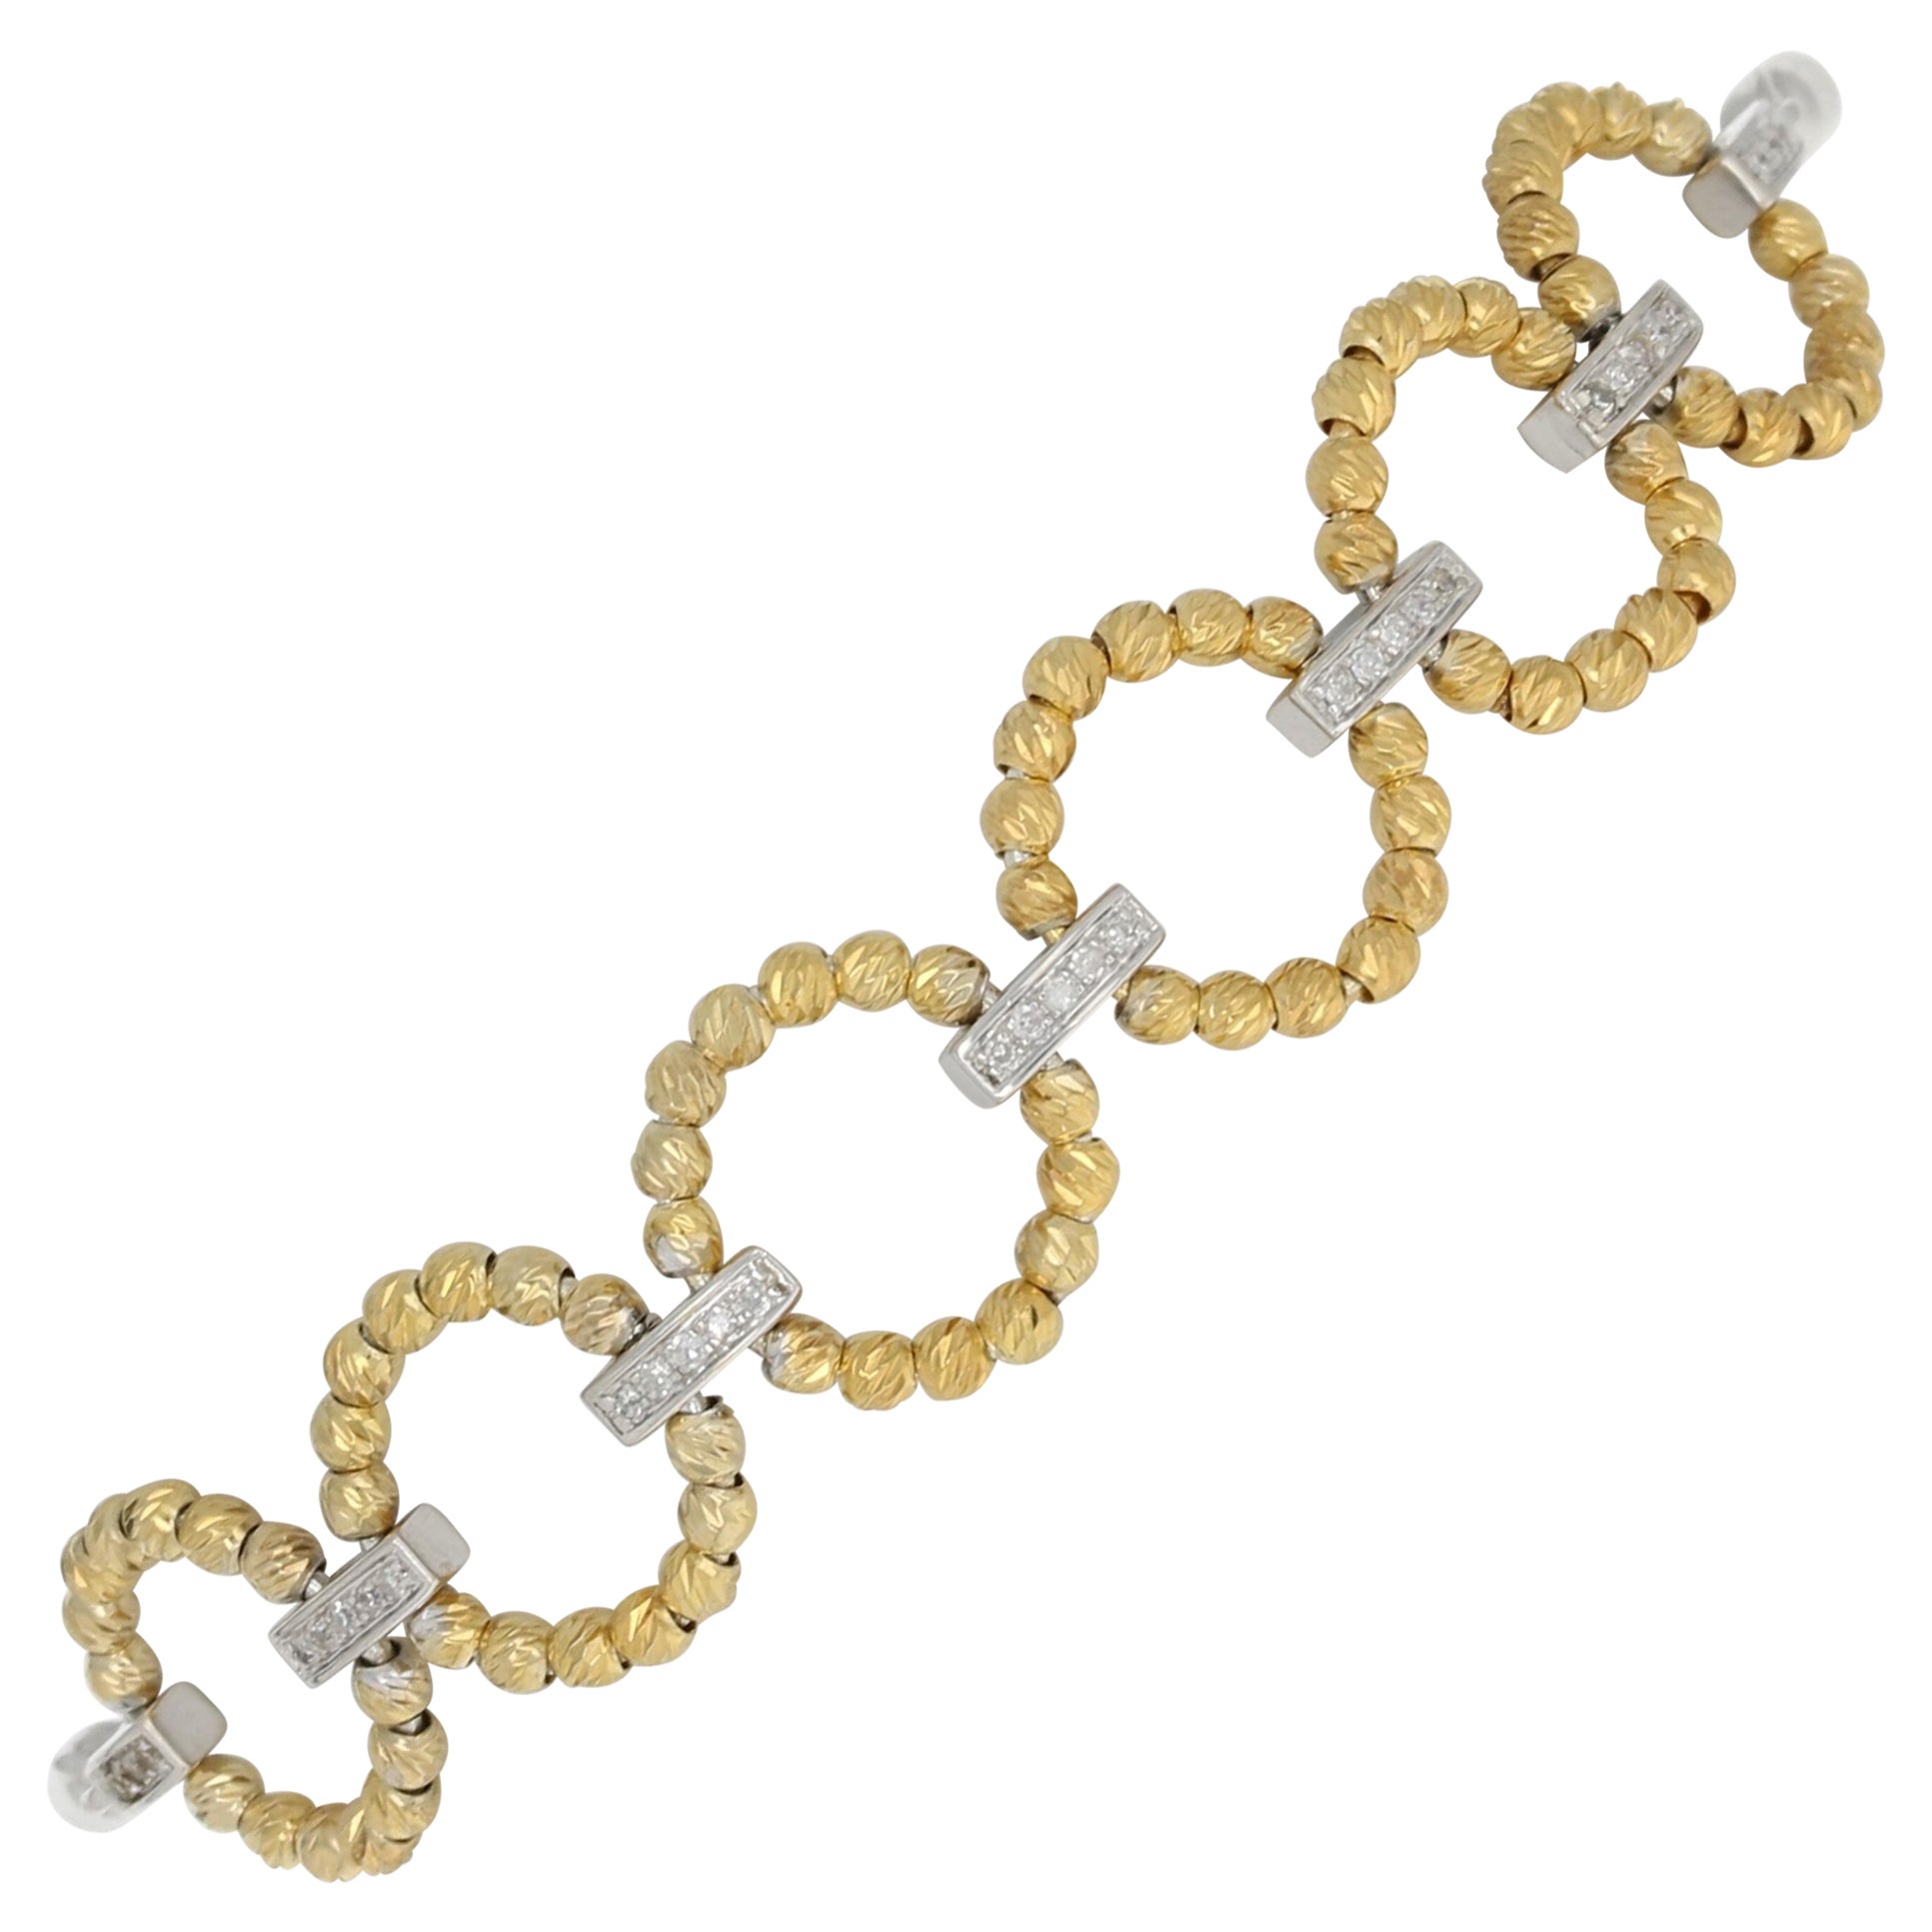 New Diamond-Accented Bracelet Sterling Silver & 10k Gold Adjustable Wheat Chain